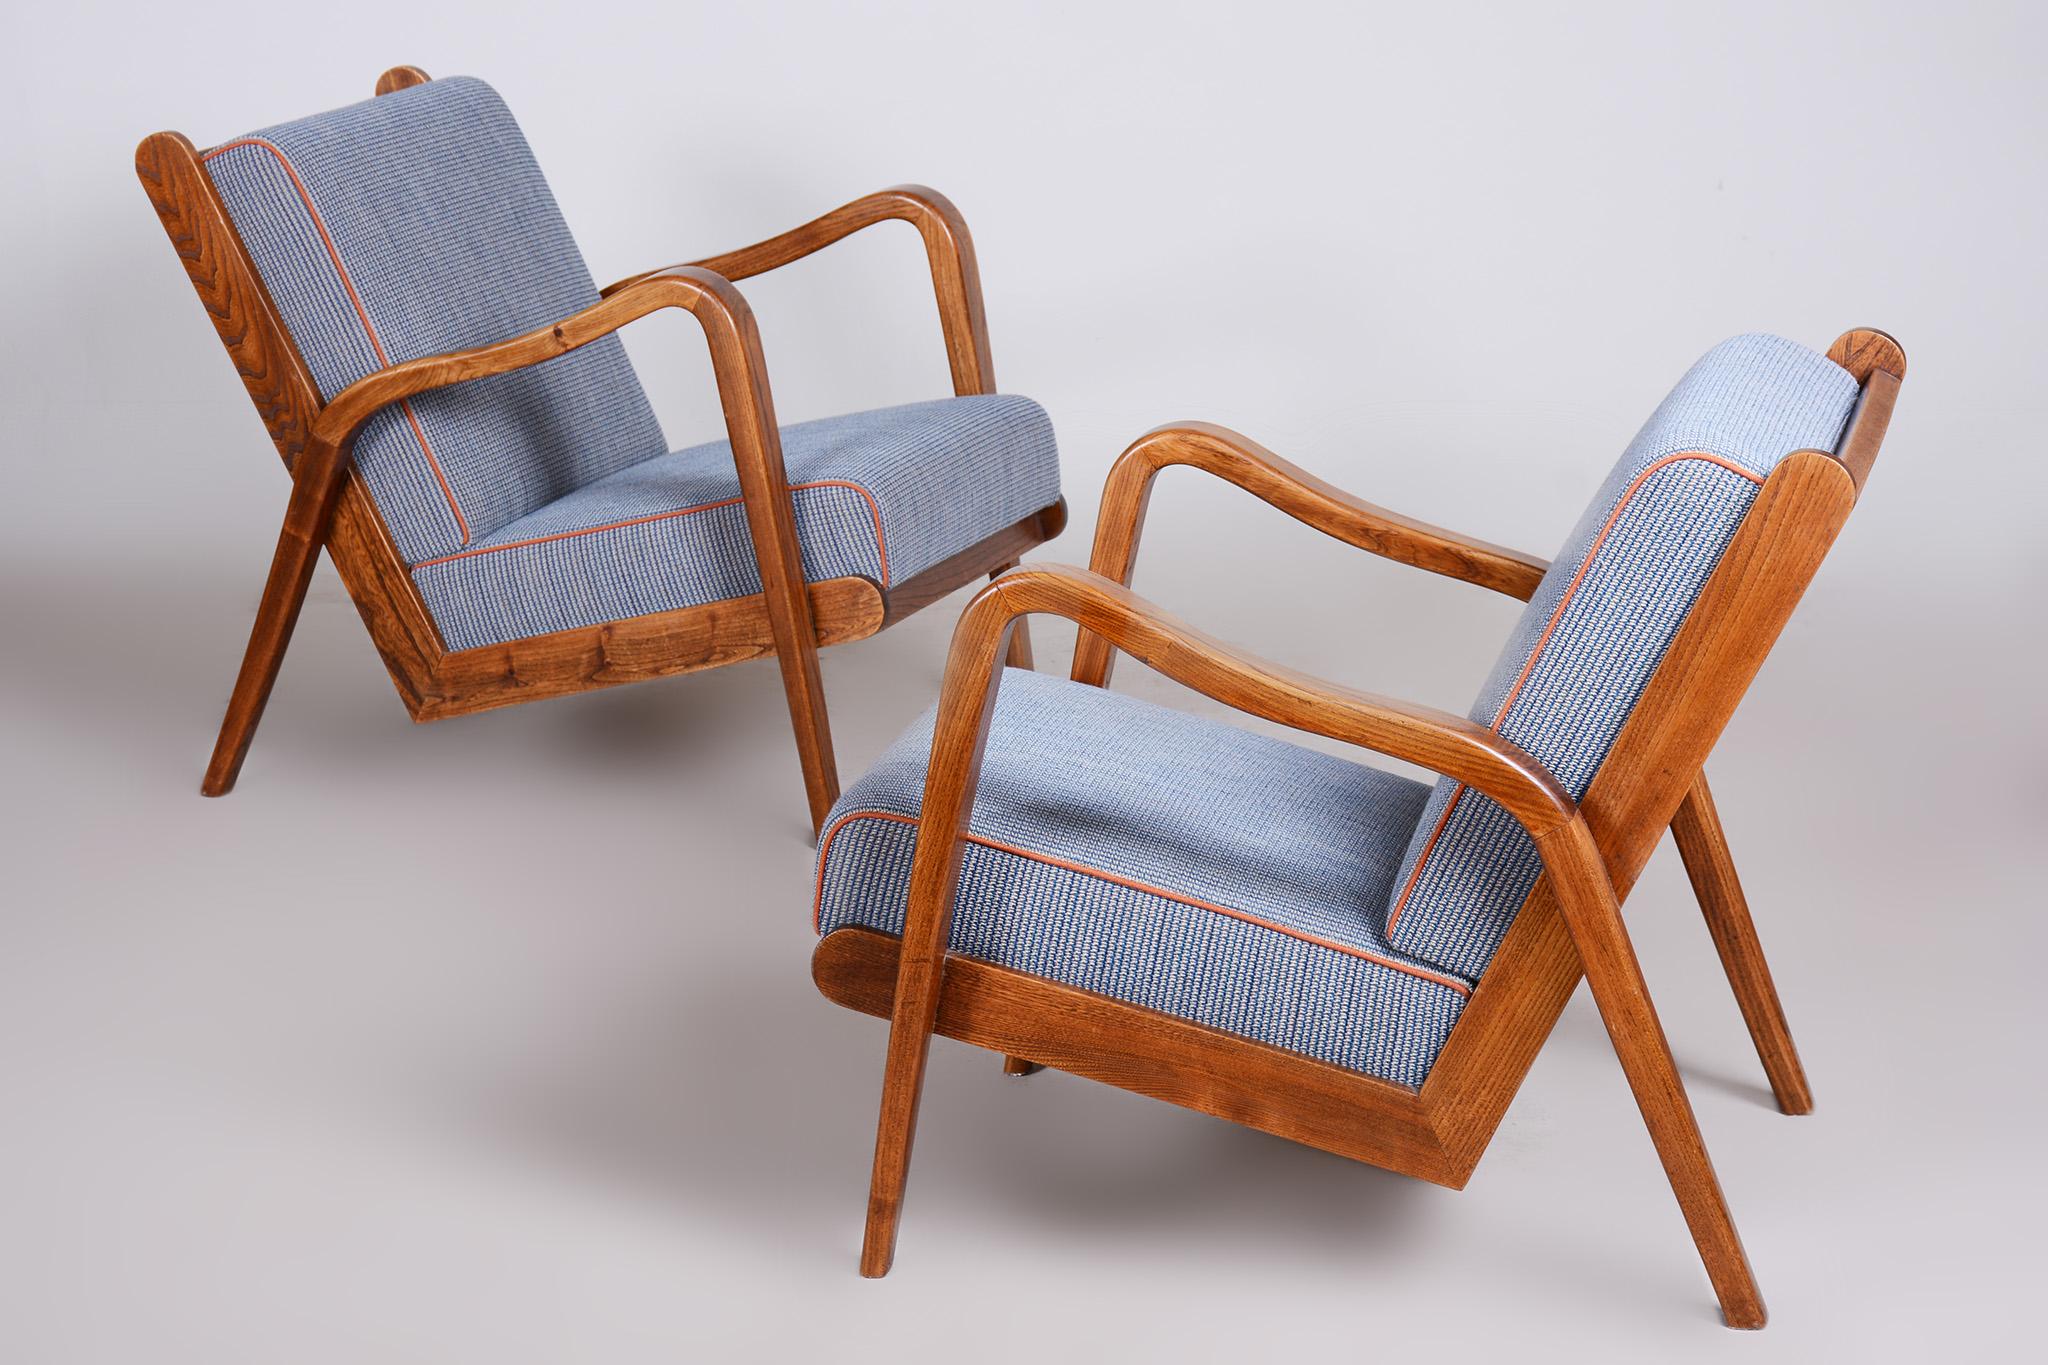 Ash Mid Century Armchairs Made in Czechia '40s, by Jan Vanek, Fully Restored 7